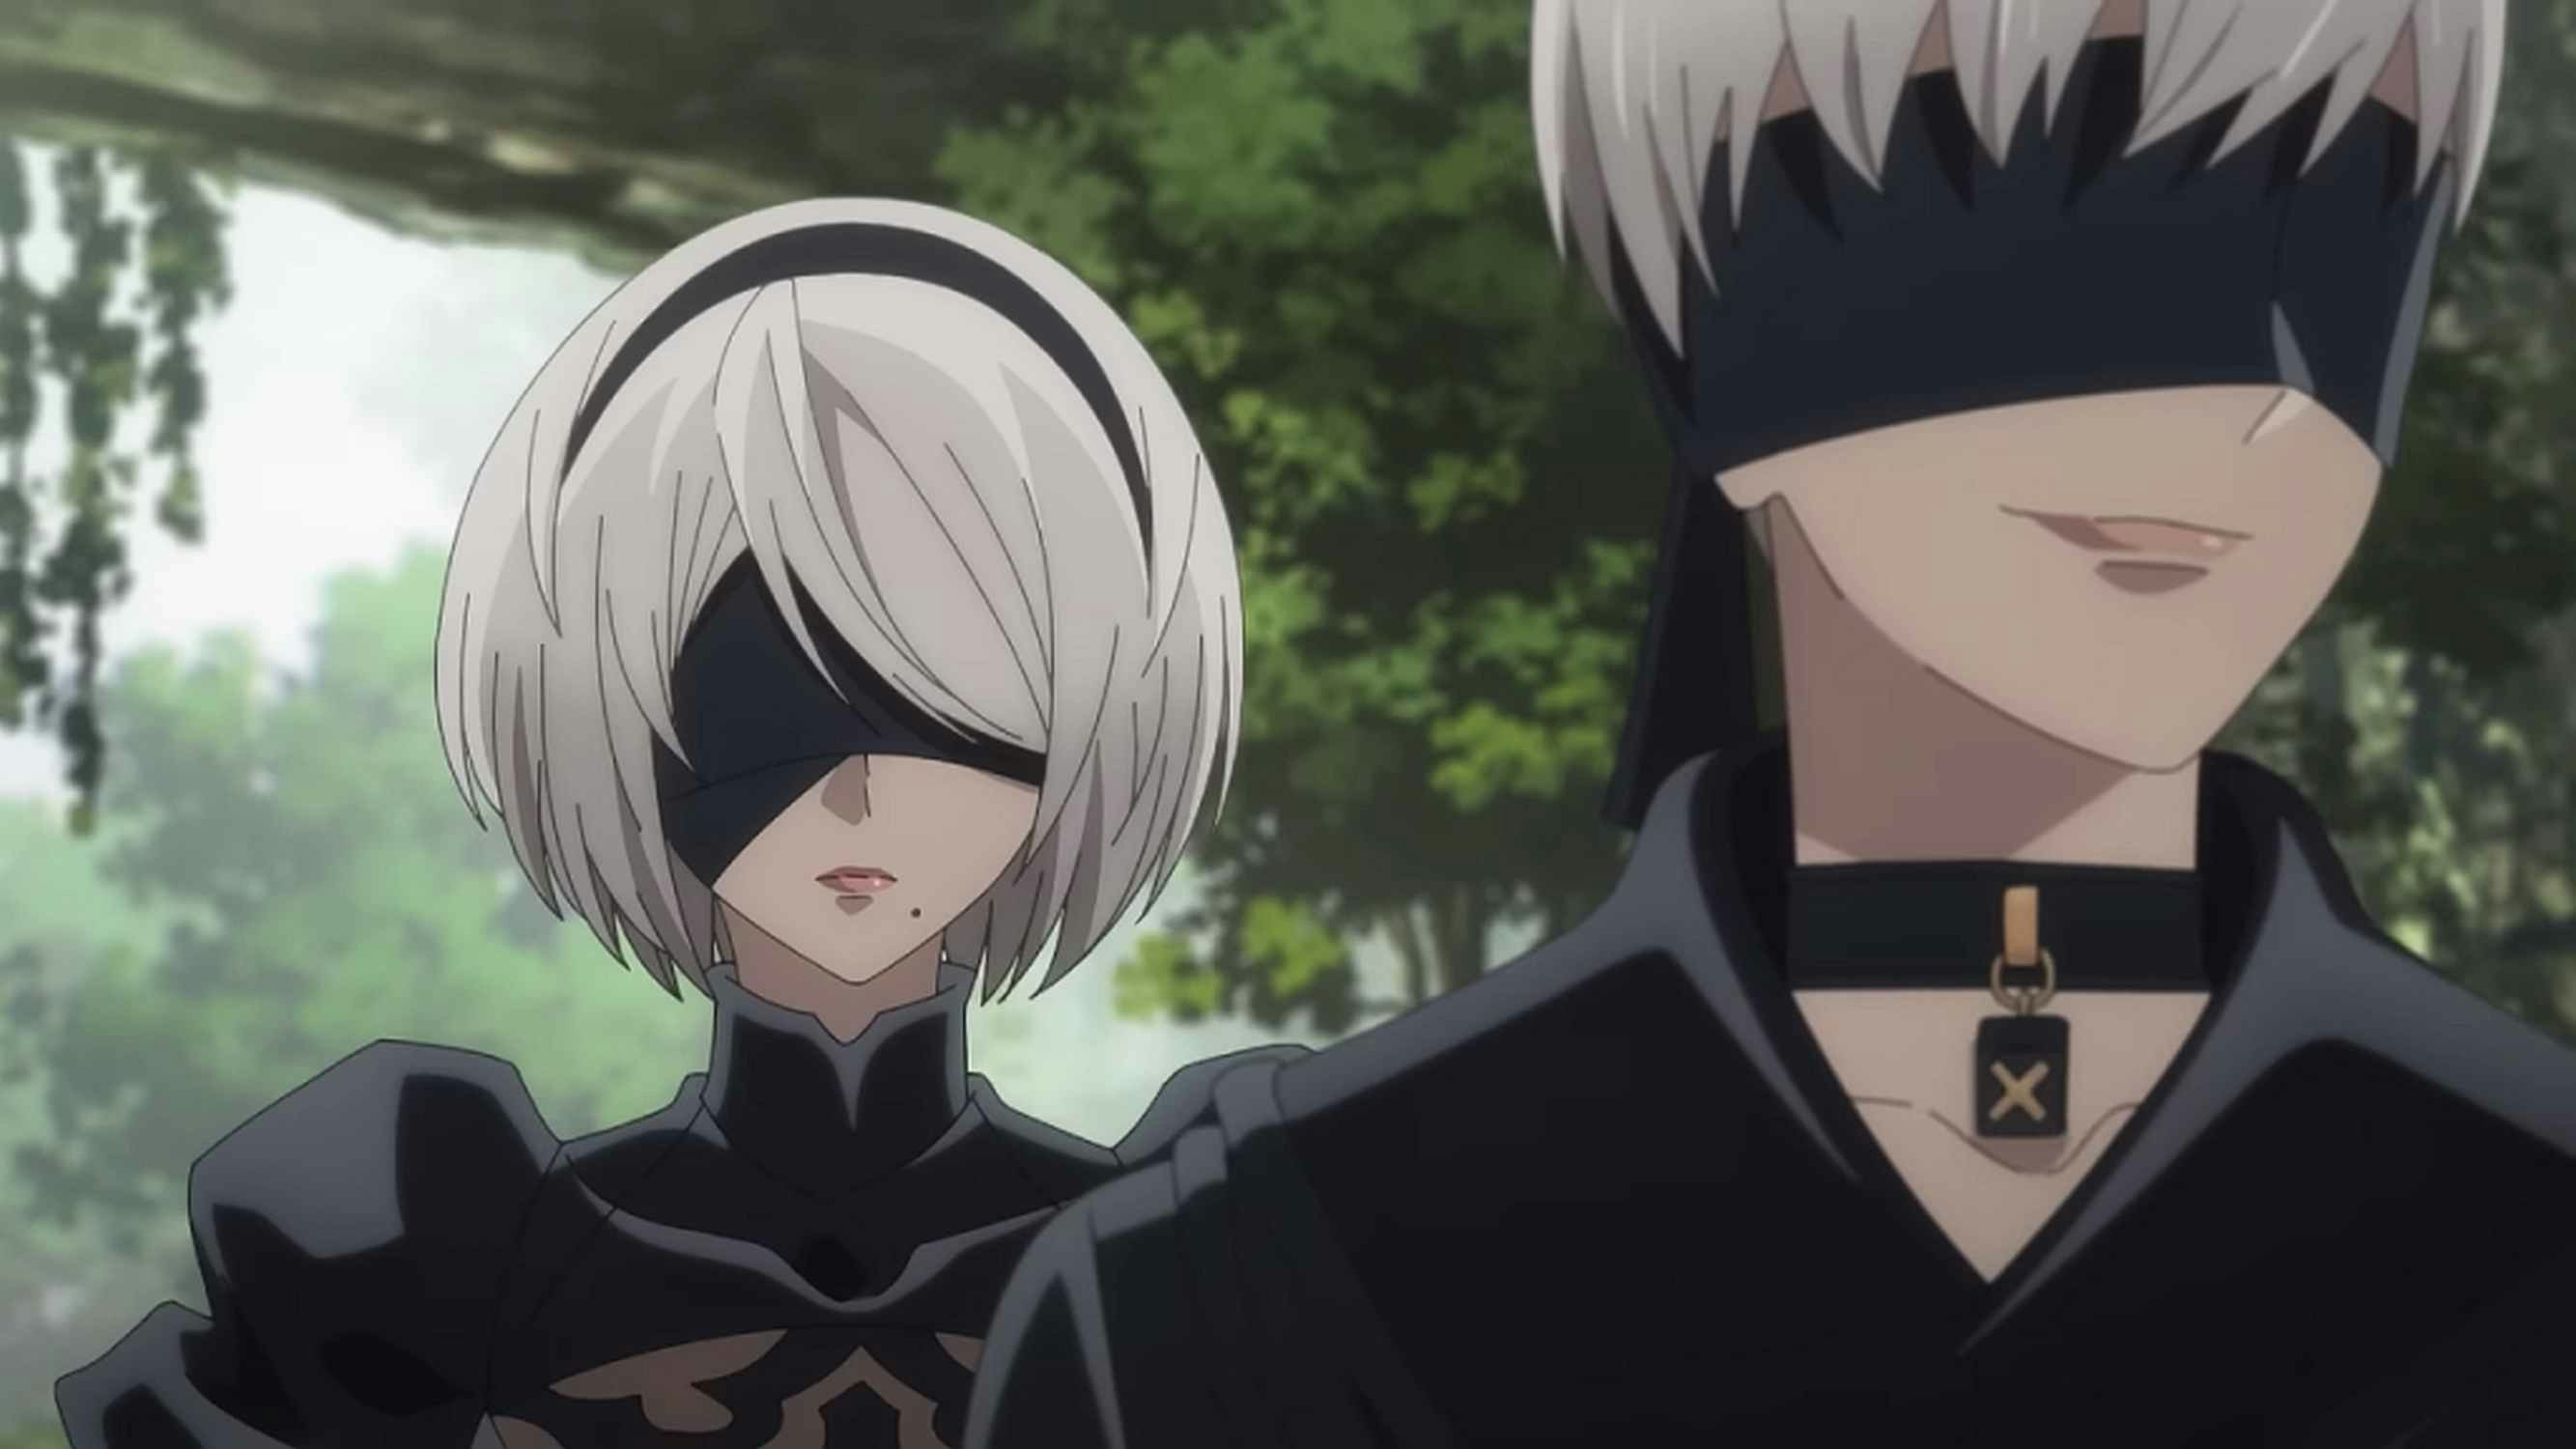 NieR: Automata Ver 1.1a Anime Coming in January 2023, Teaser Videos Released